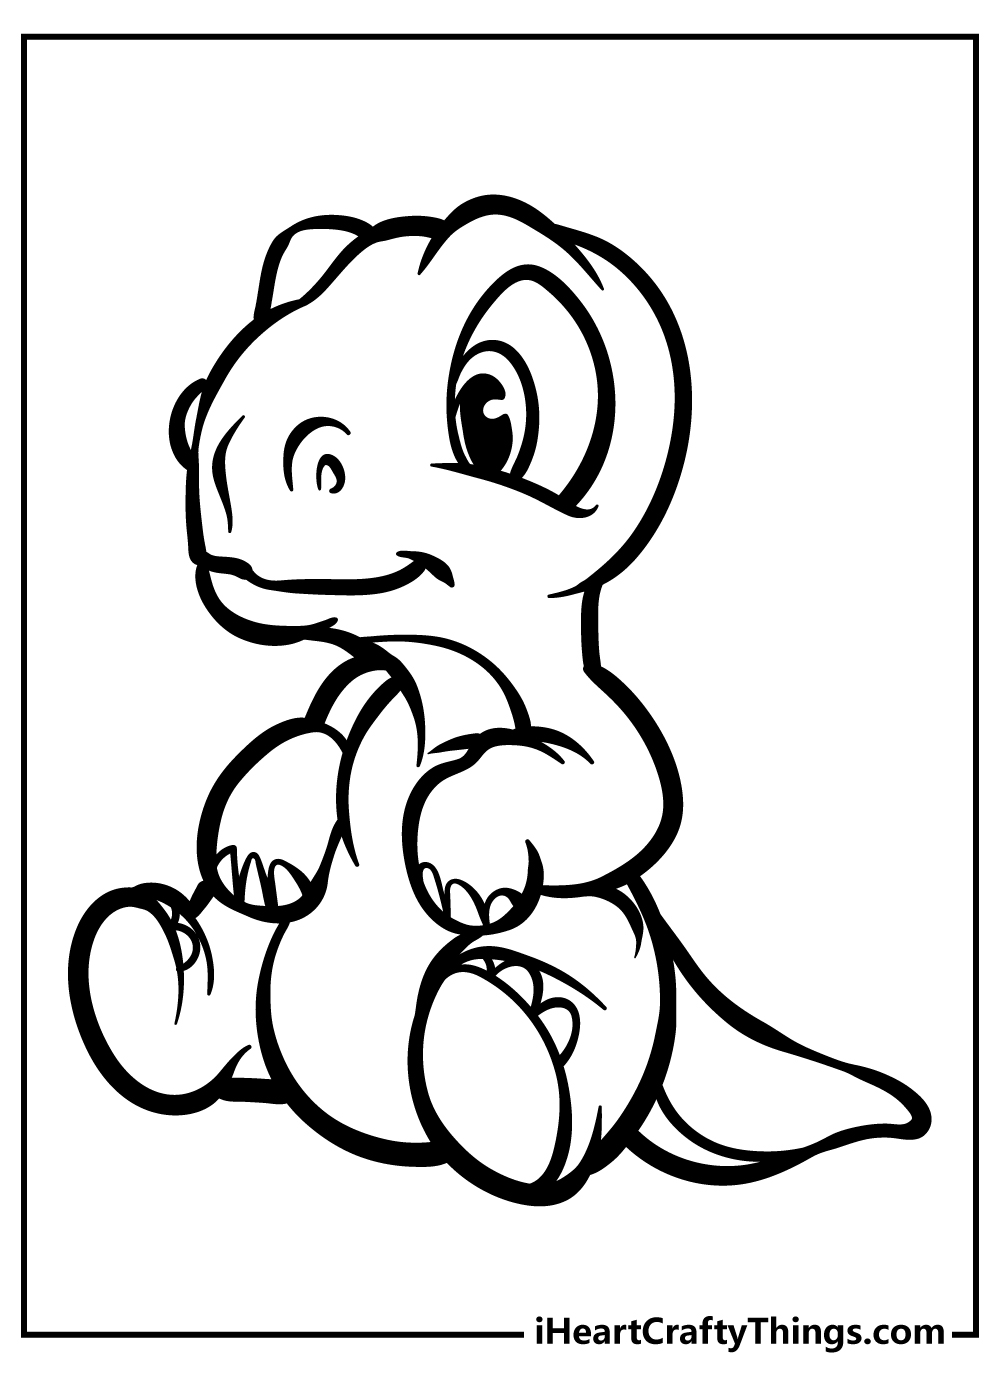 Baby Dinosaur Coloring Sheet for children free download